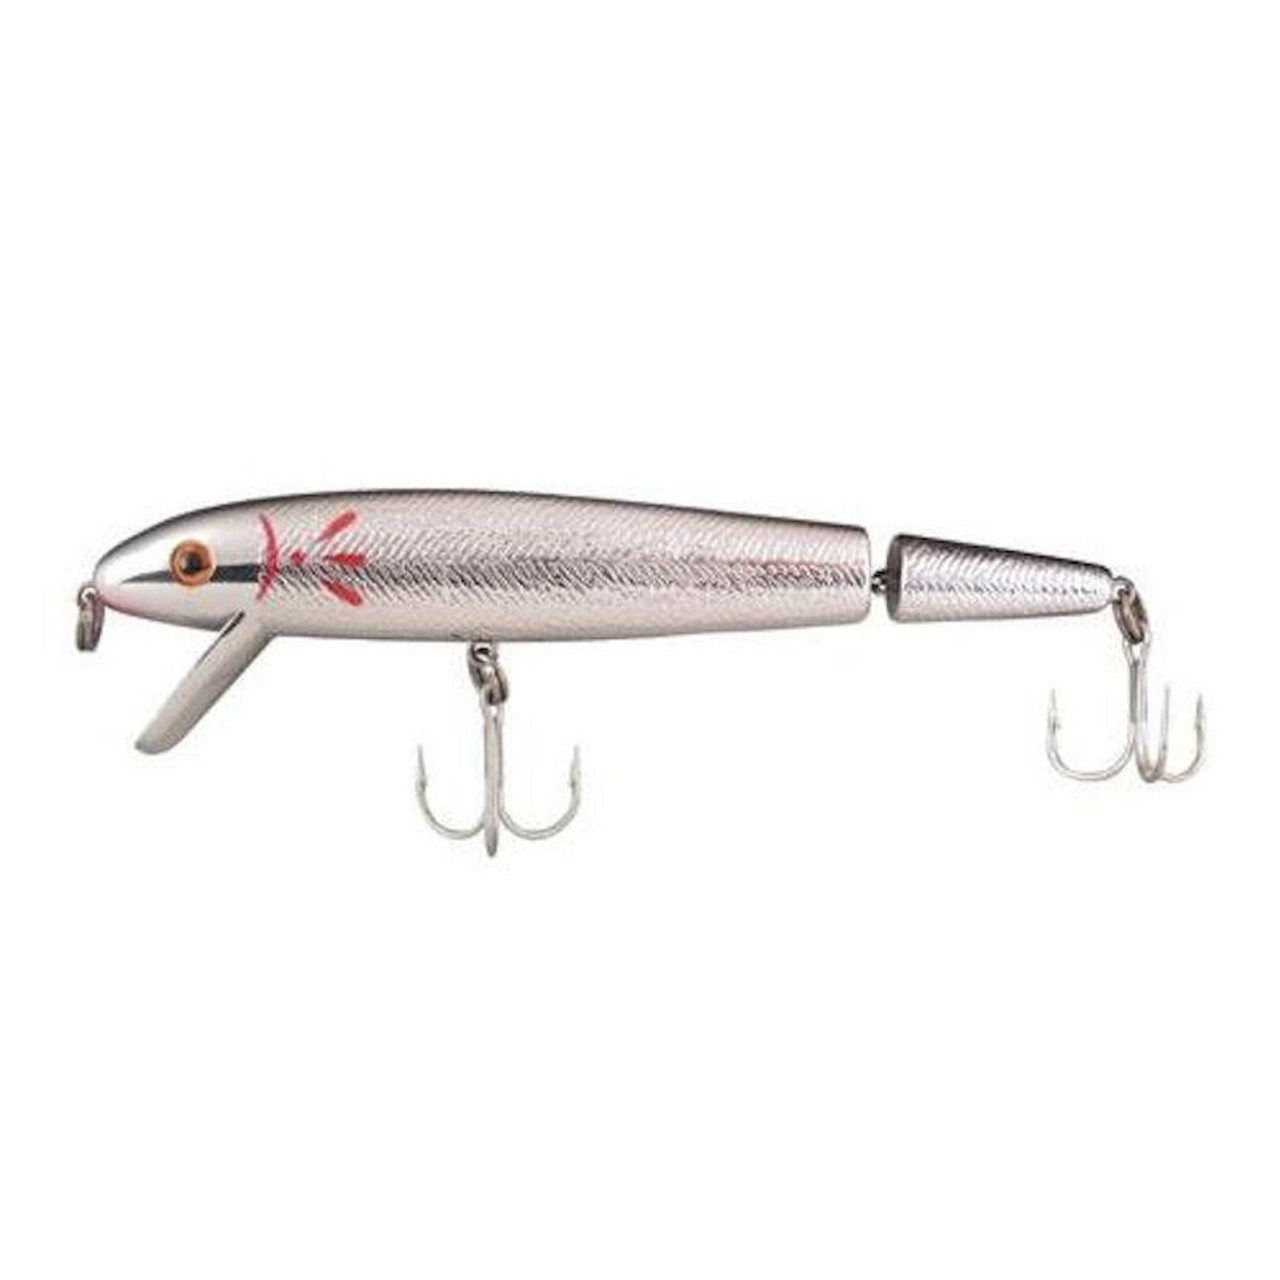 Cotton Cordell Deep Diving Red Fin - Chrome/Blue Back